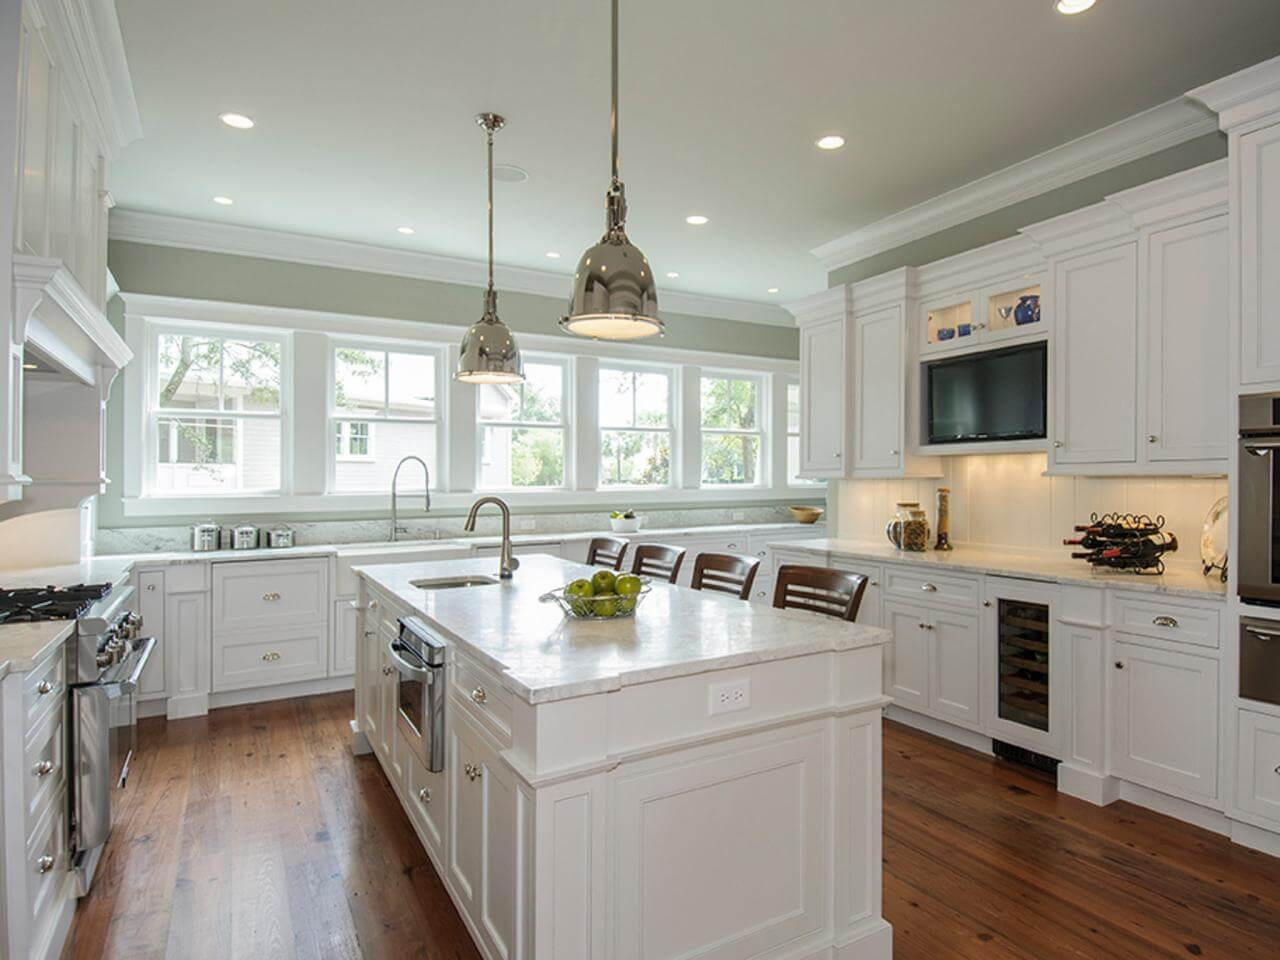 White Kitchen Cabinet Images
 White Traditional Kitchen Cabinets TheyDesign